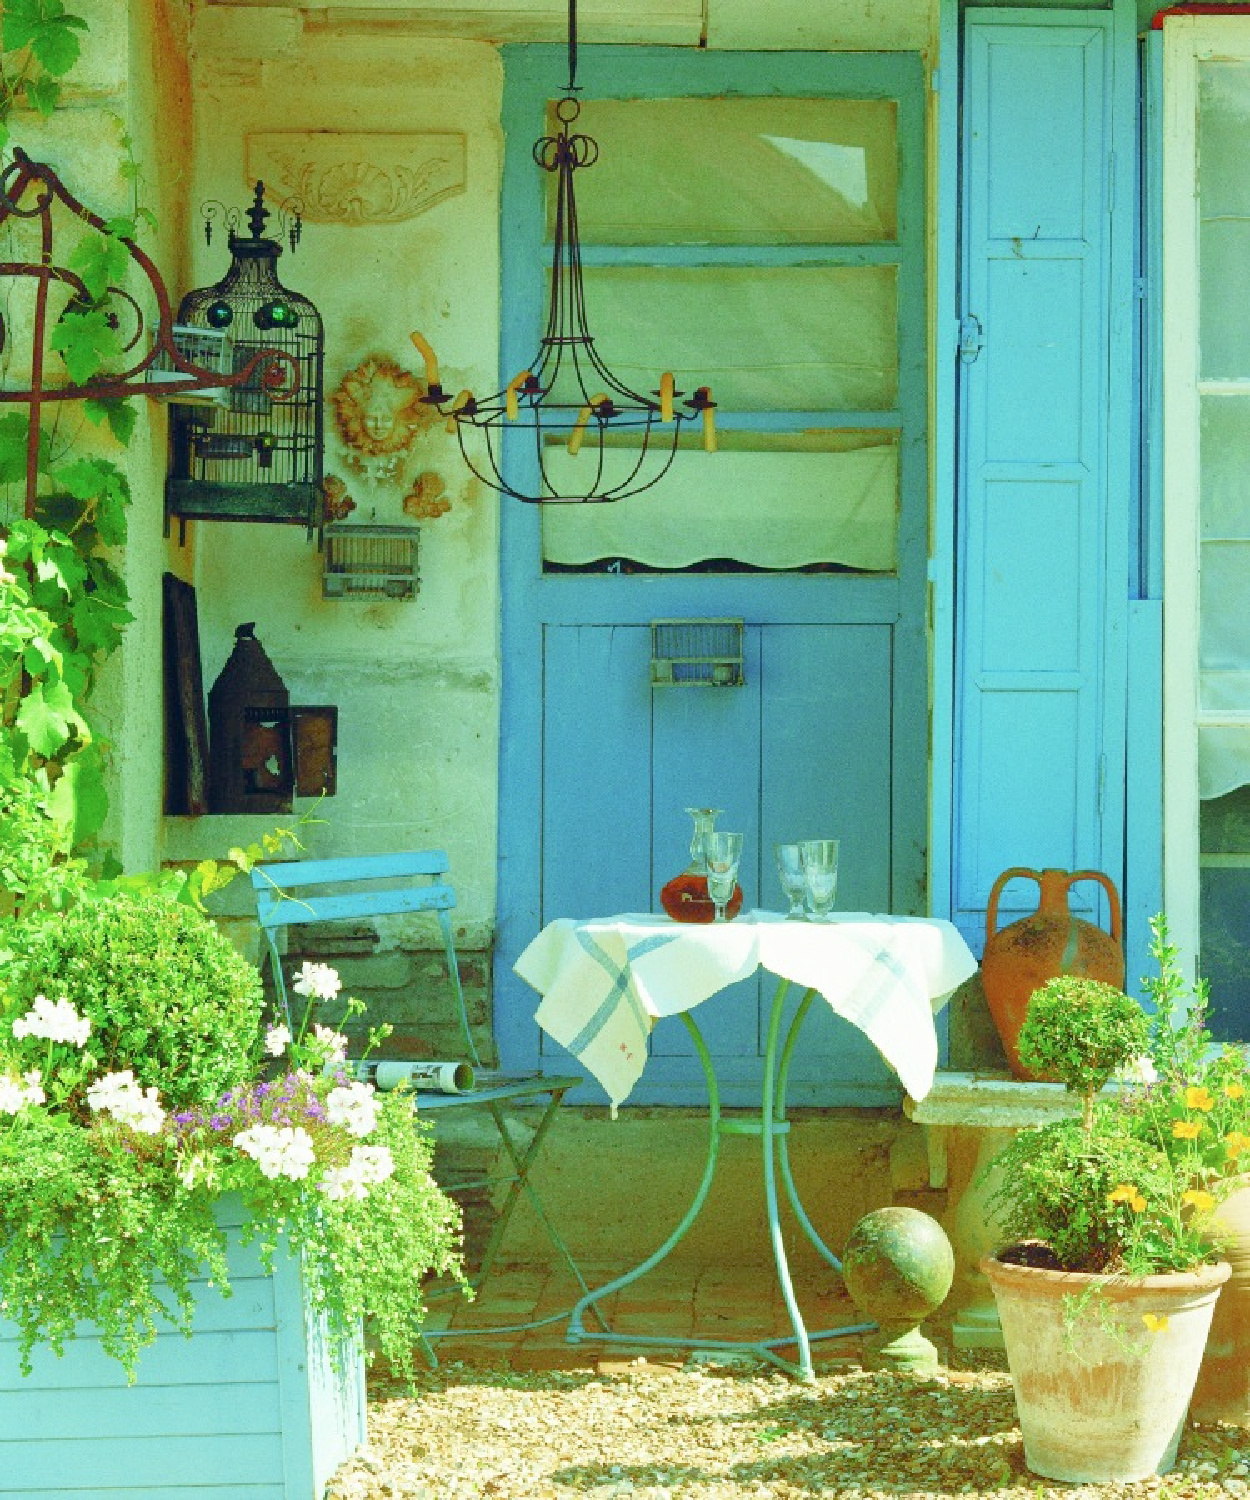 Bright blue shutters and accents in French farmhouse garden with bistro chair - from La Vie Est Belle by Henrietta Heald. #frenchgarden #frenchcountryexterior #frenchhomes